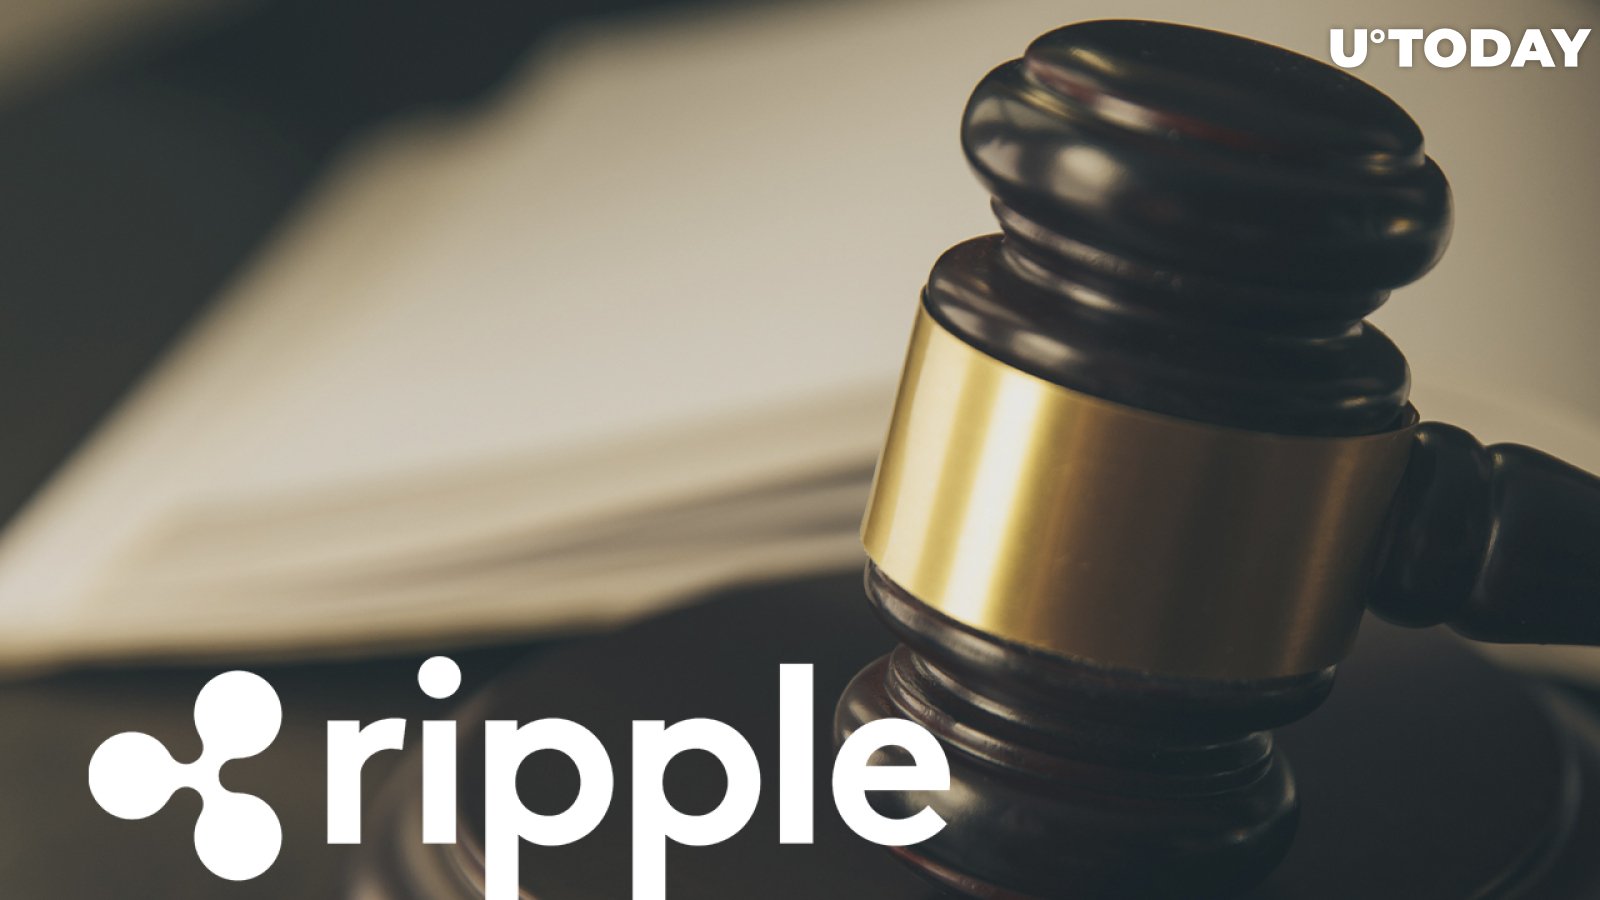 CryptoLaw Founder John Deaton Makes Bold Predictions on Ripple SEC Lawsuit: Details